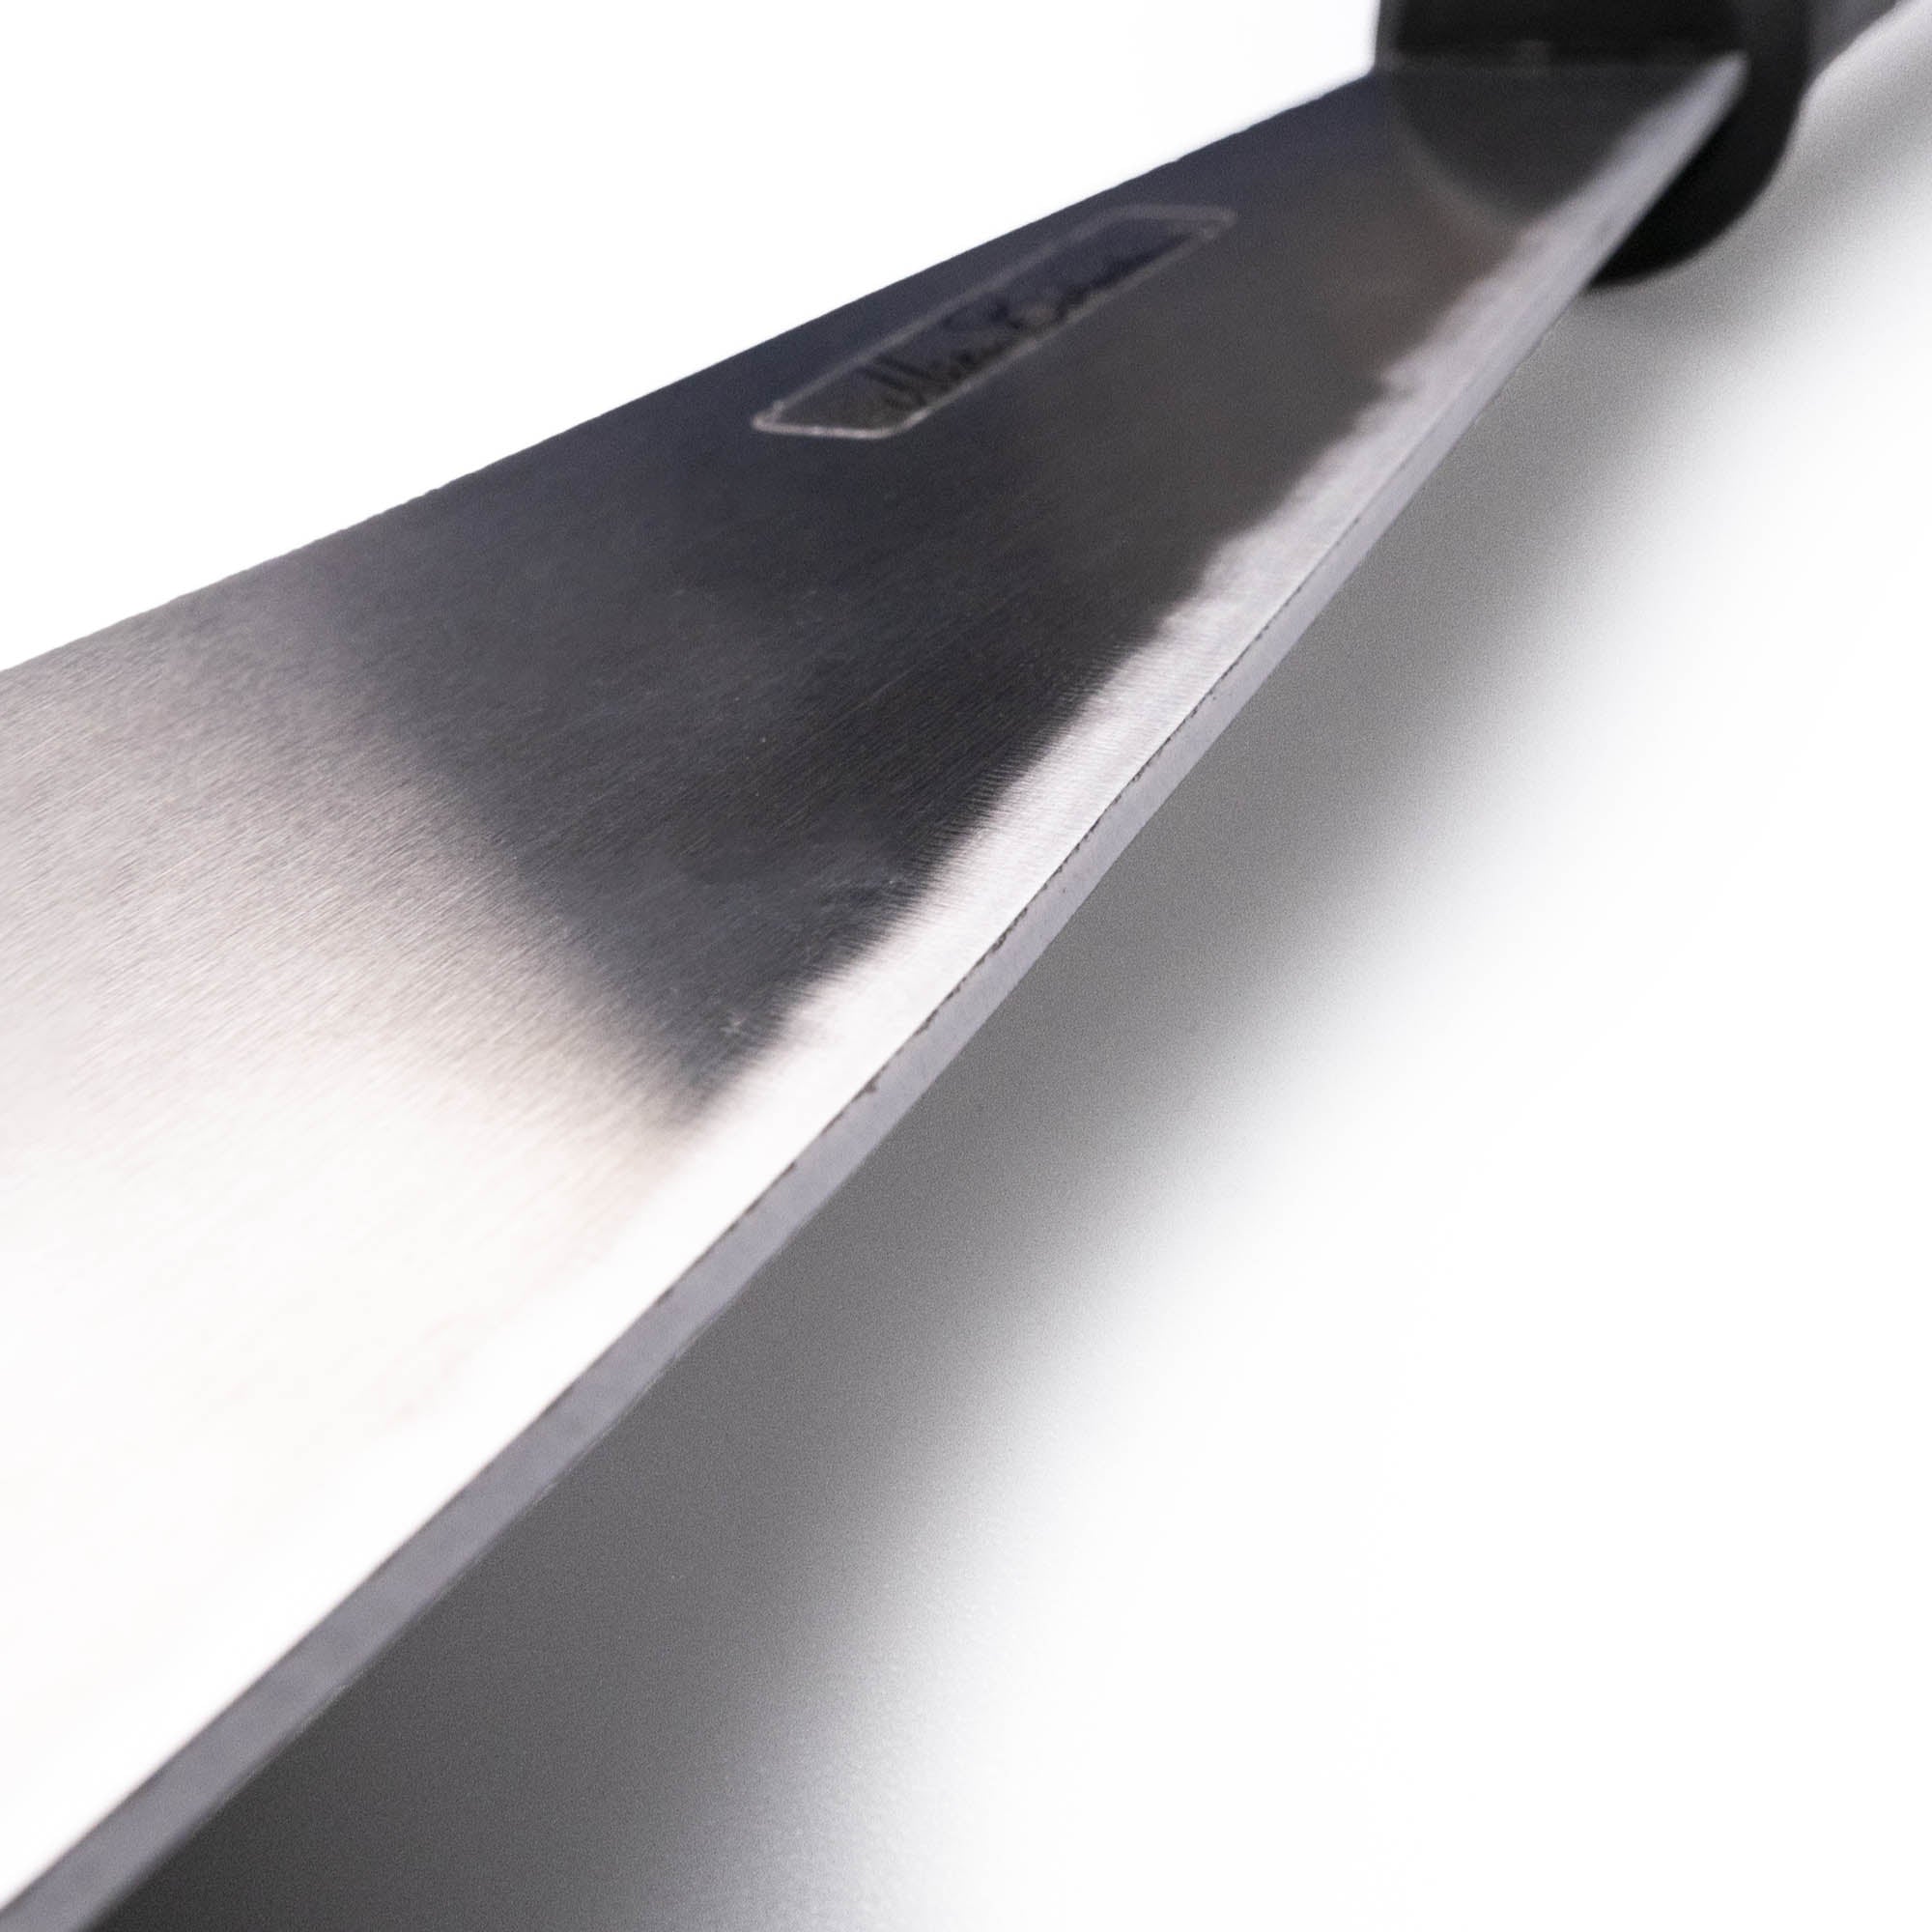 Mr Babache juggling knife close up of the blade edge